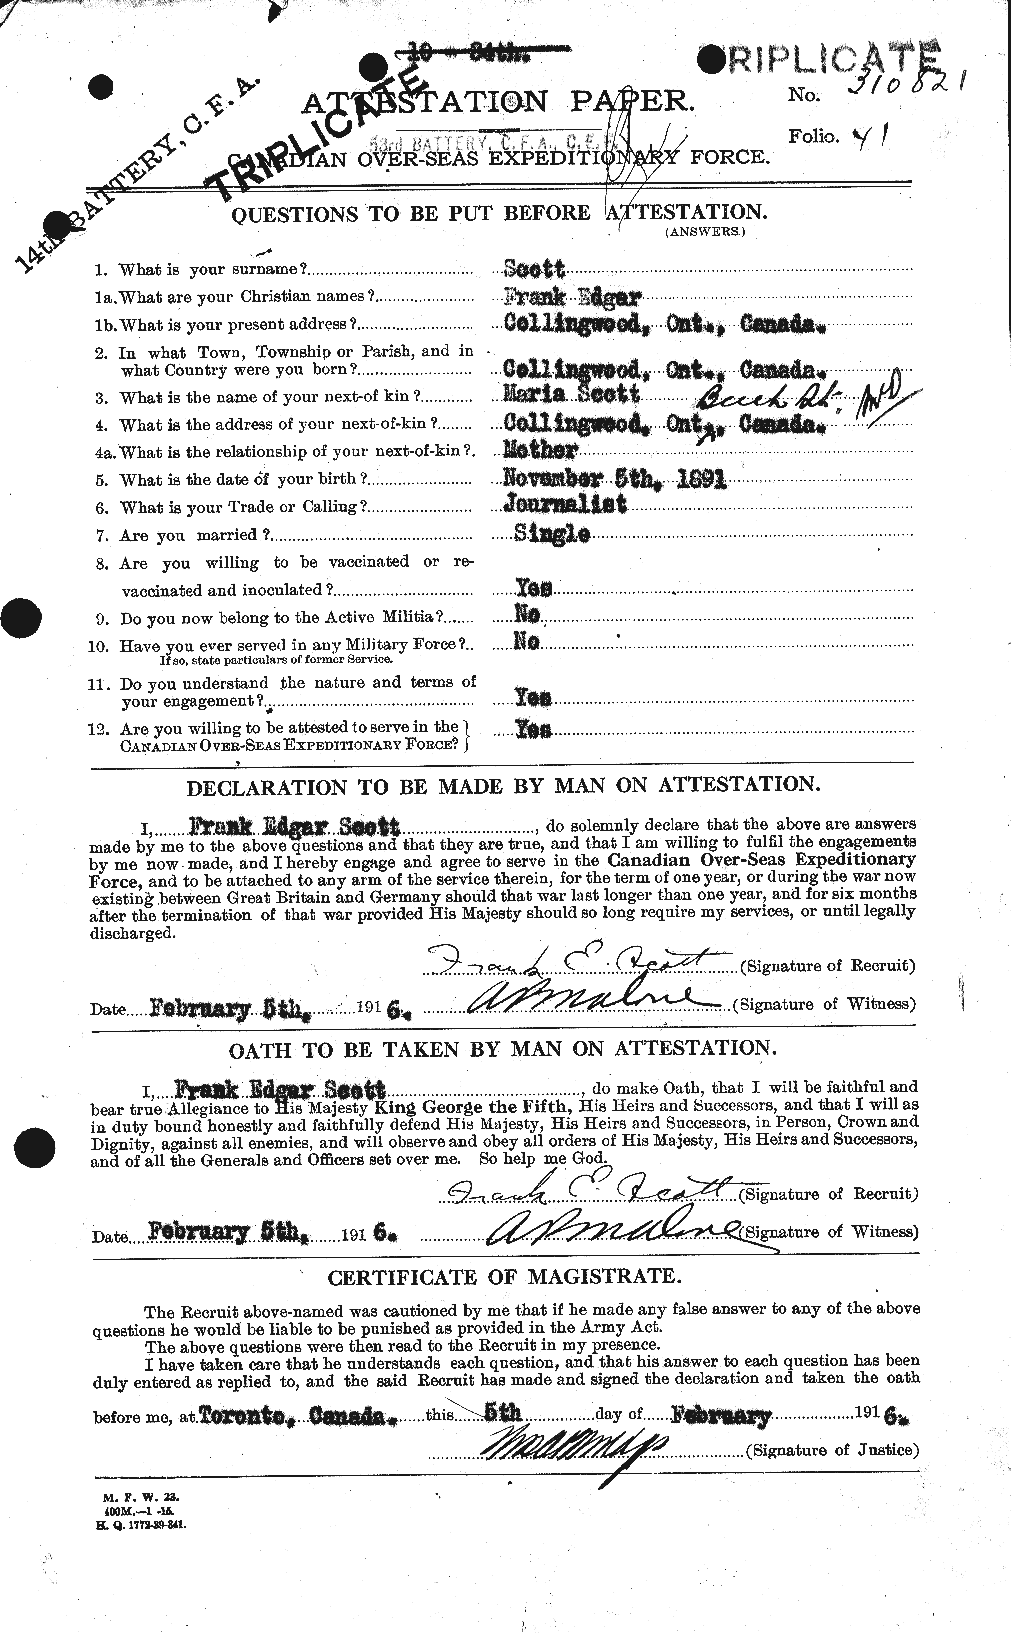 Personnel Records of the First World War - CEF 084704a